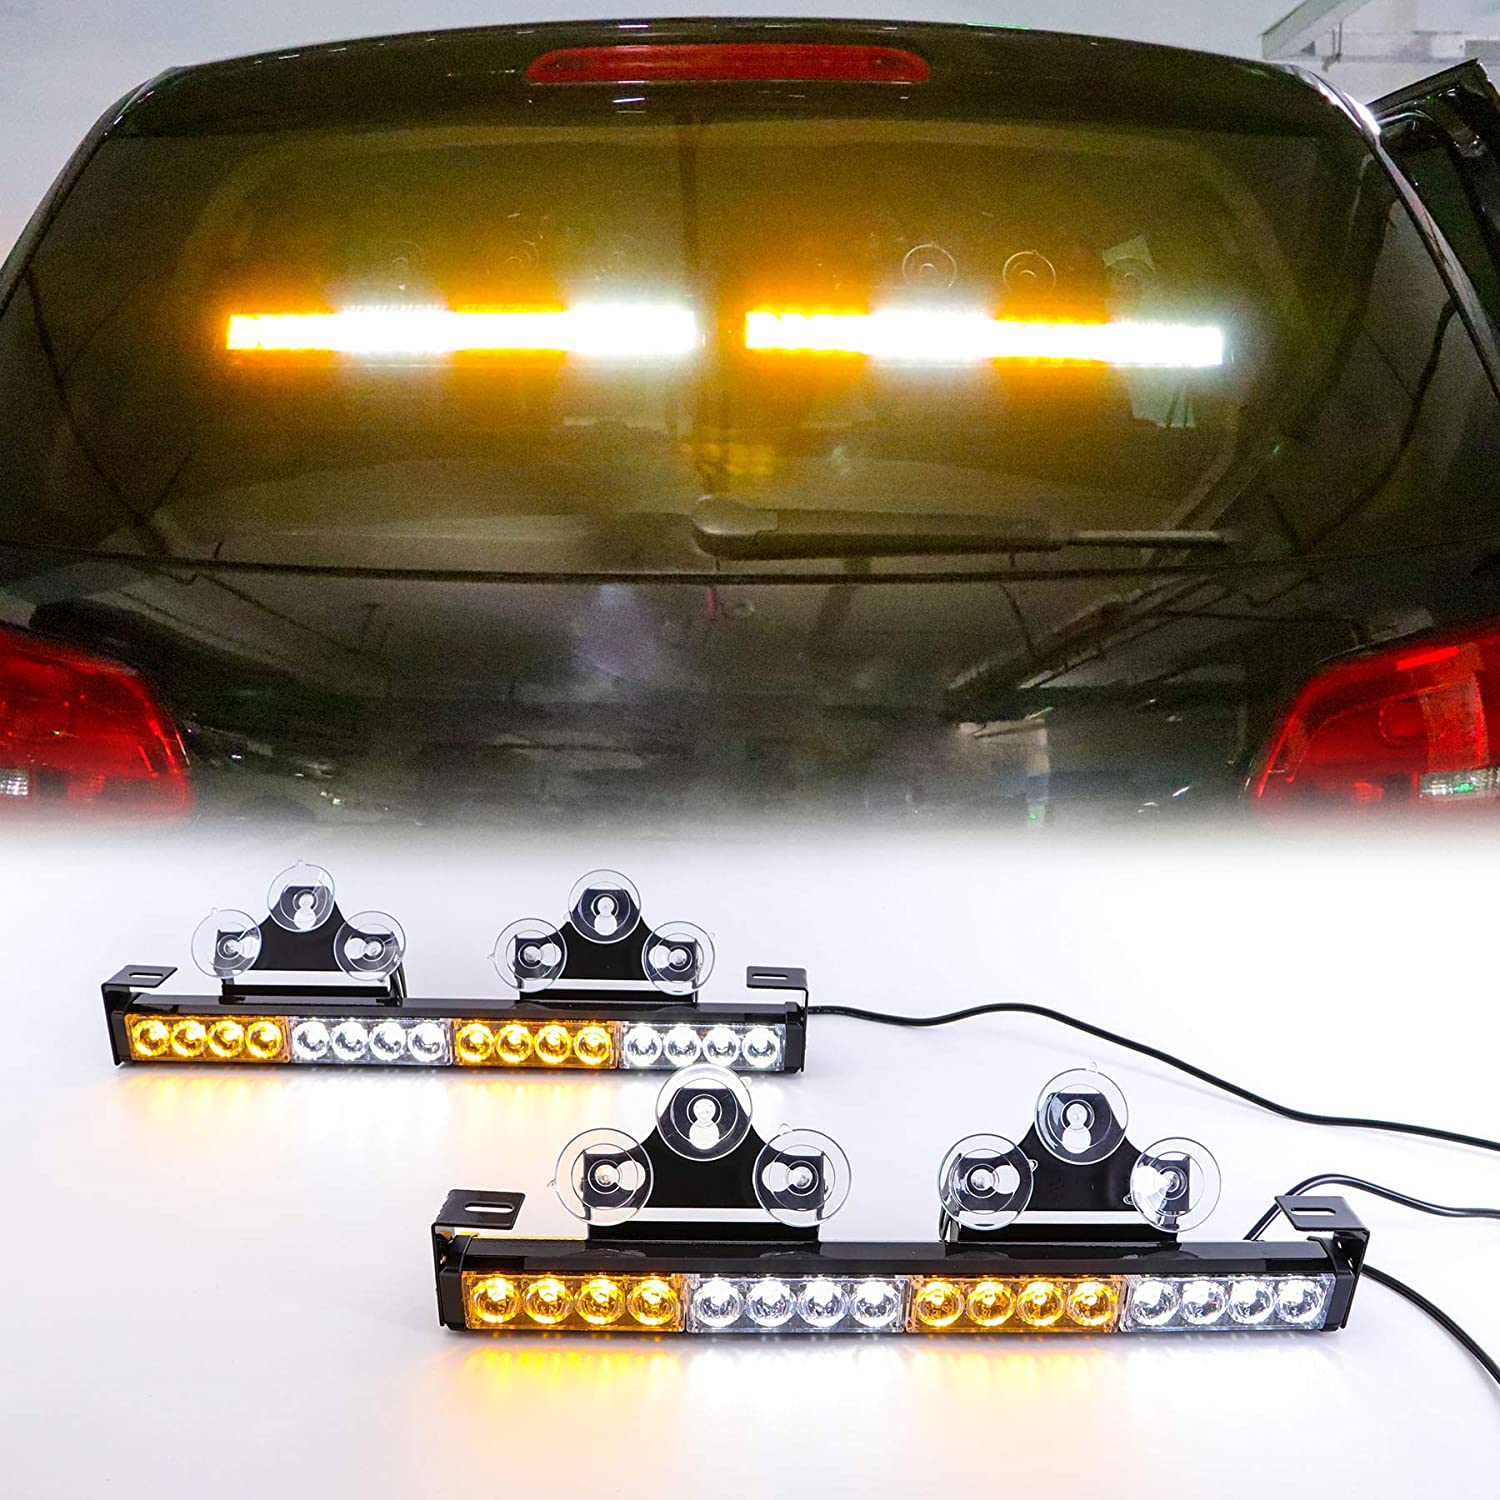 Flashing LED lights for the car yellow white multi colour